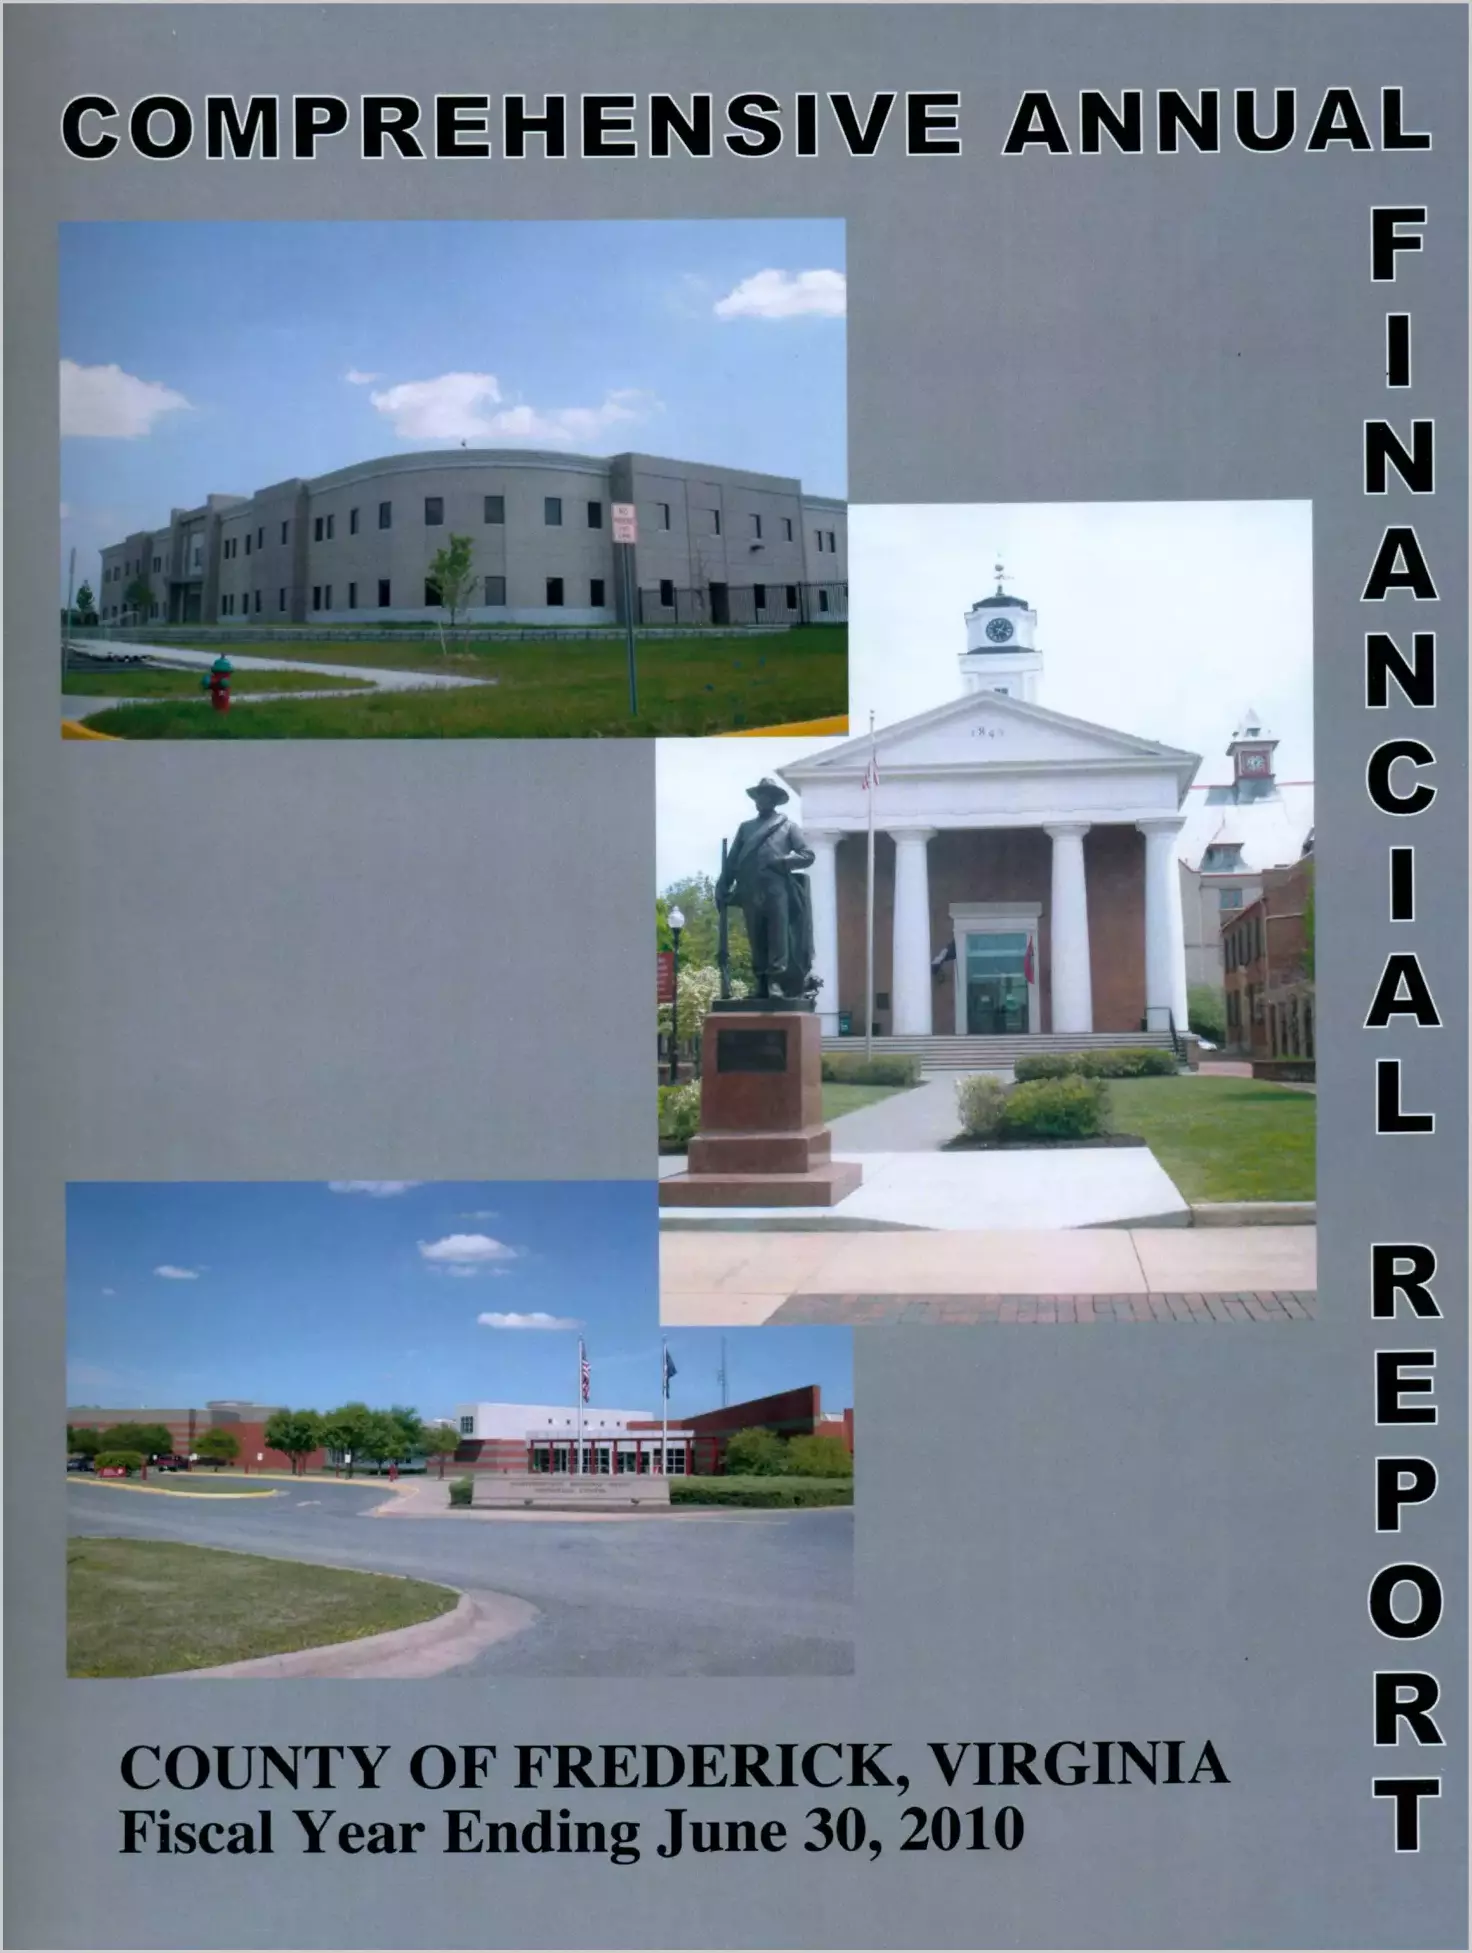 2010 Annual Financial Report for County of Frederick